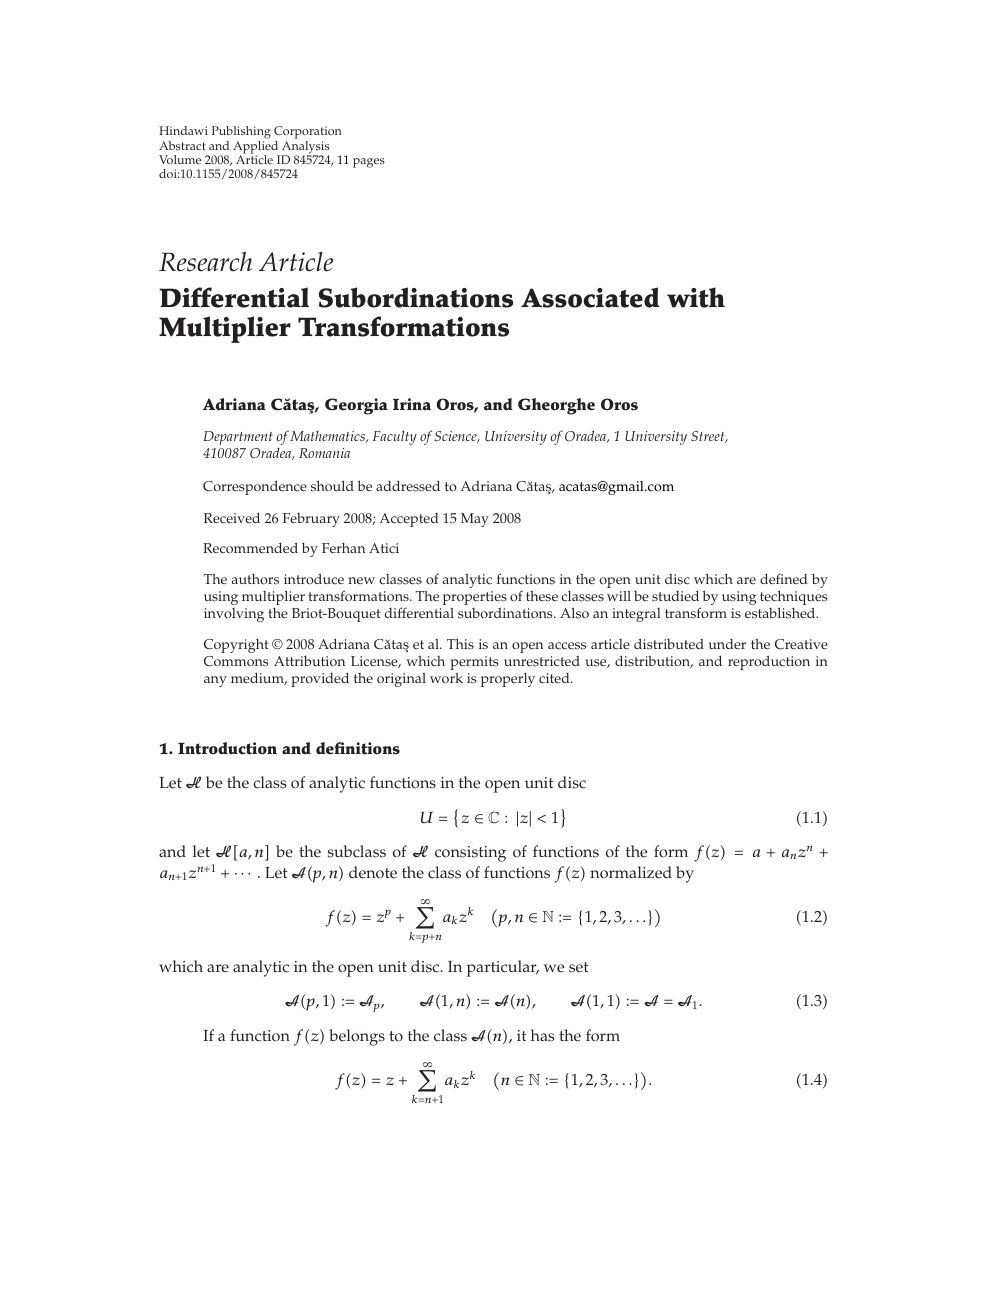 Differential Subordinations Associated with Multiplier Transformations –  topic of research paper in Mathematics. Download scholarly article PDF and  read for free on CyberLeninka open science hub.